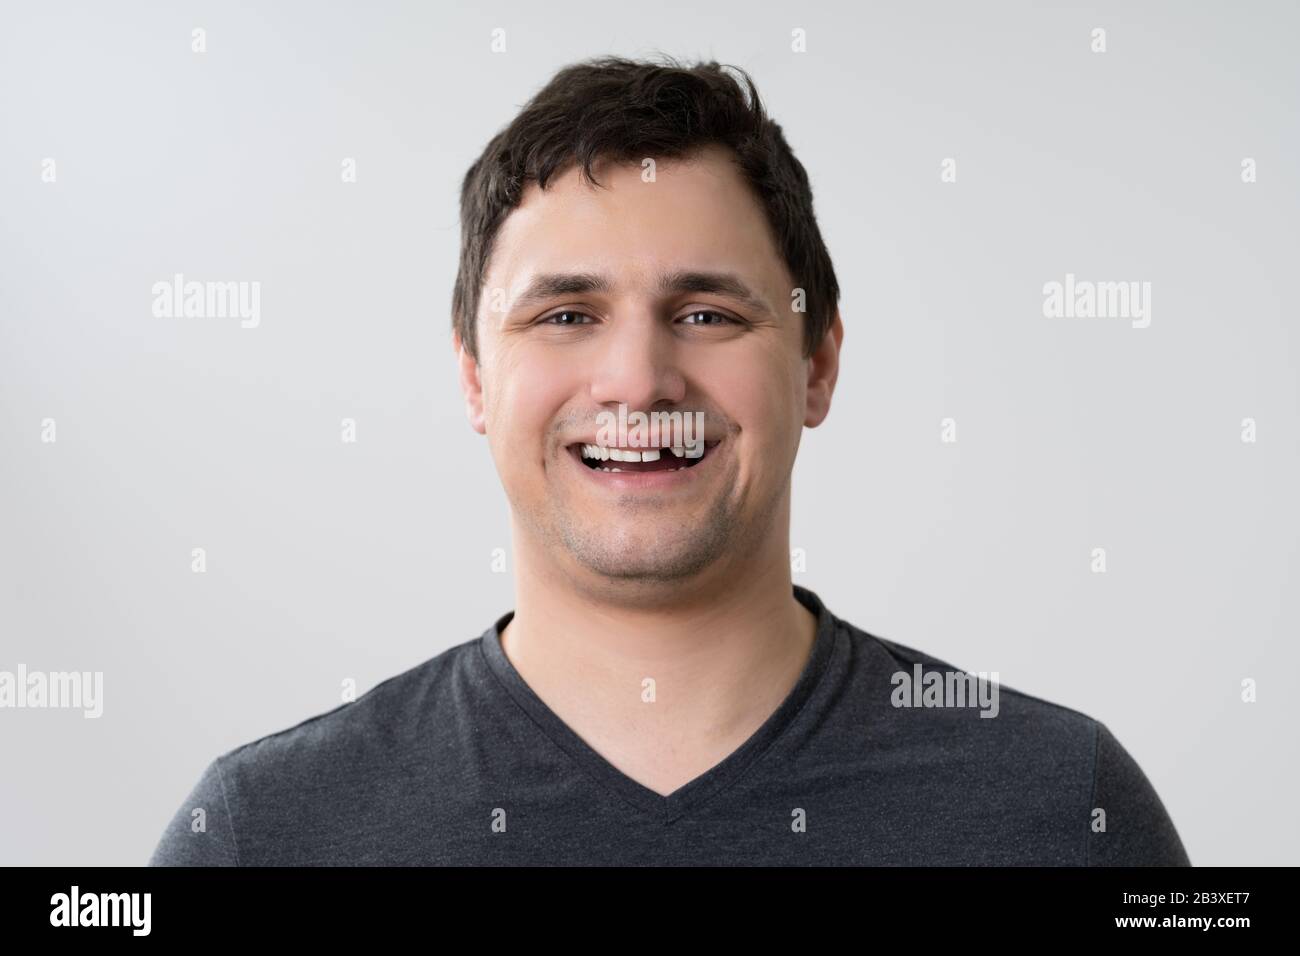 Portrait Of Young Man With Missing Tooth Stock Photo